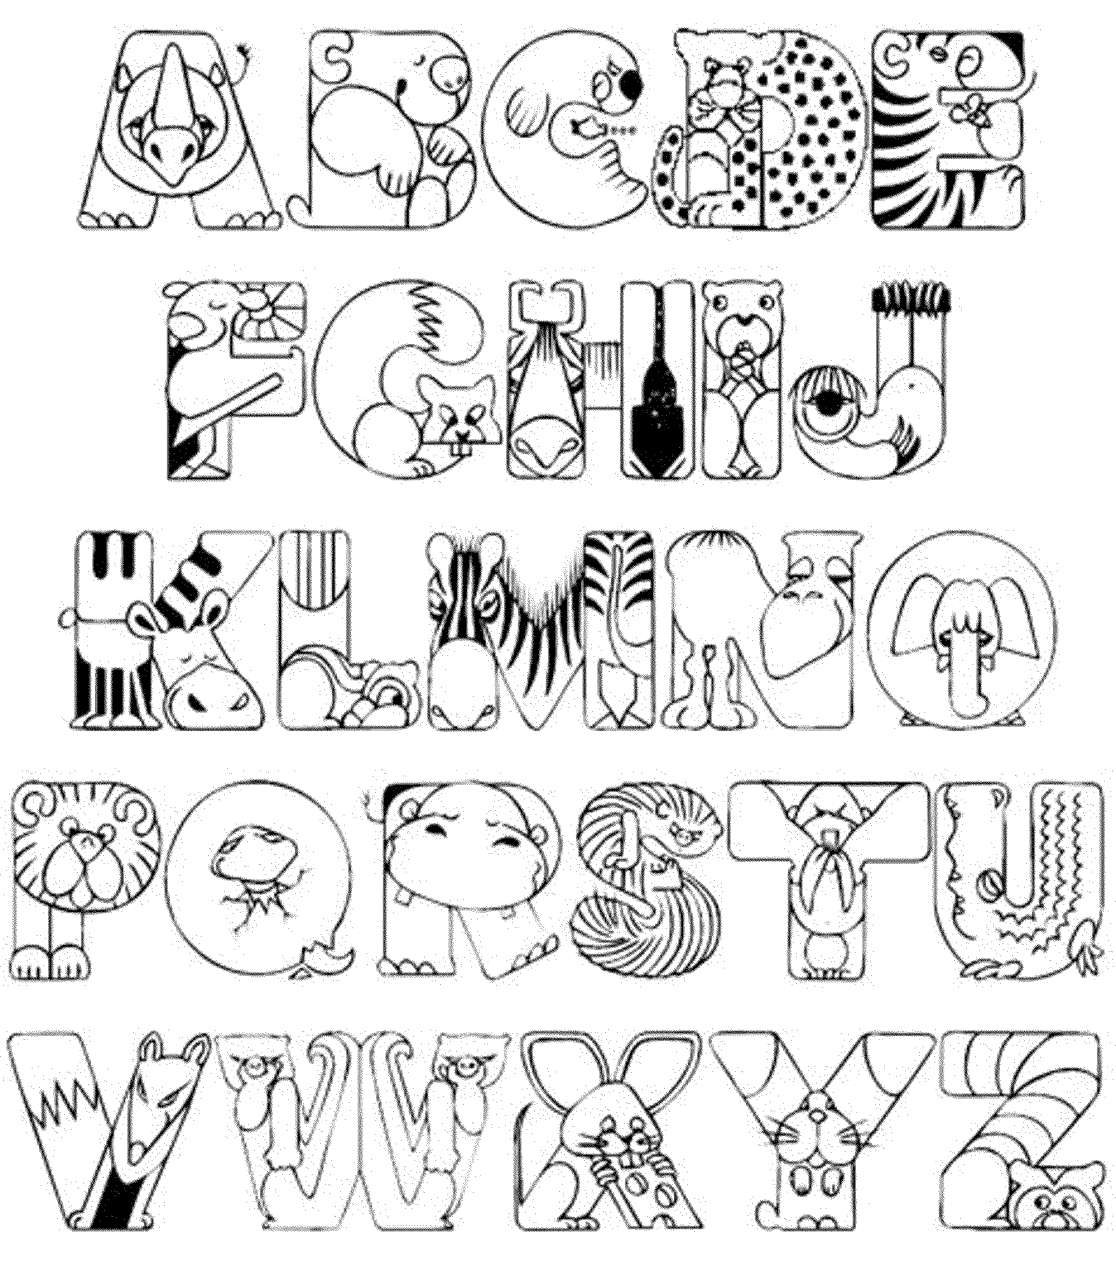 Be Creative with ABC Coloring Pages